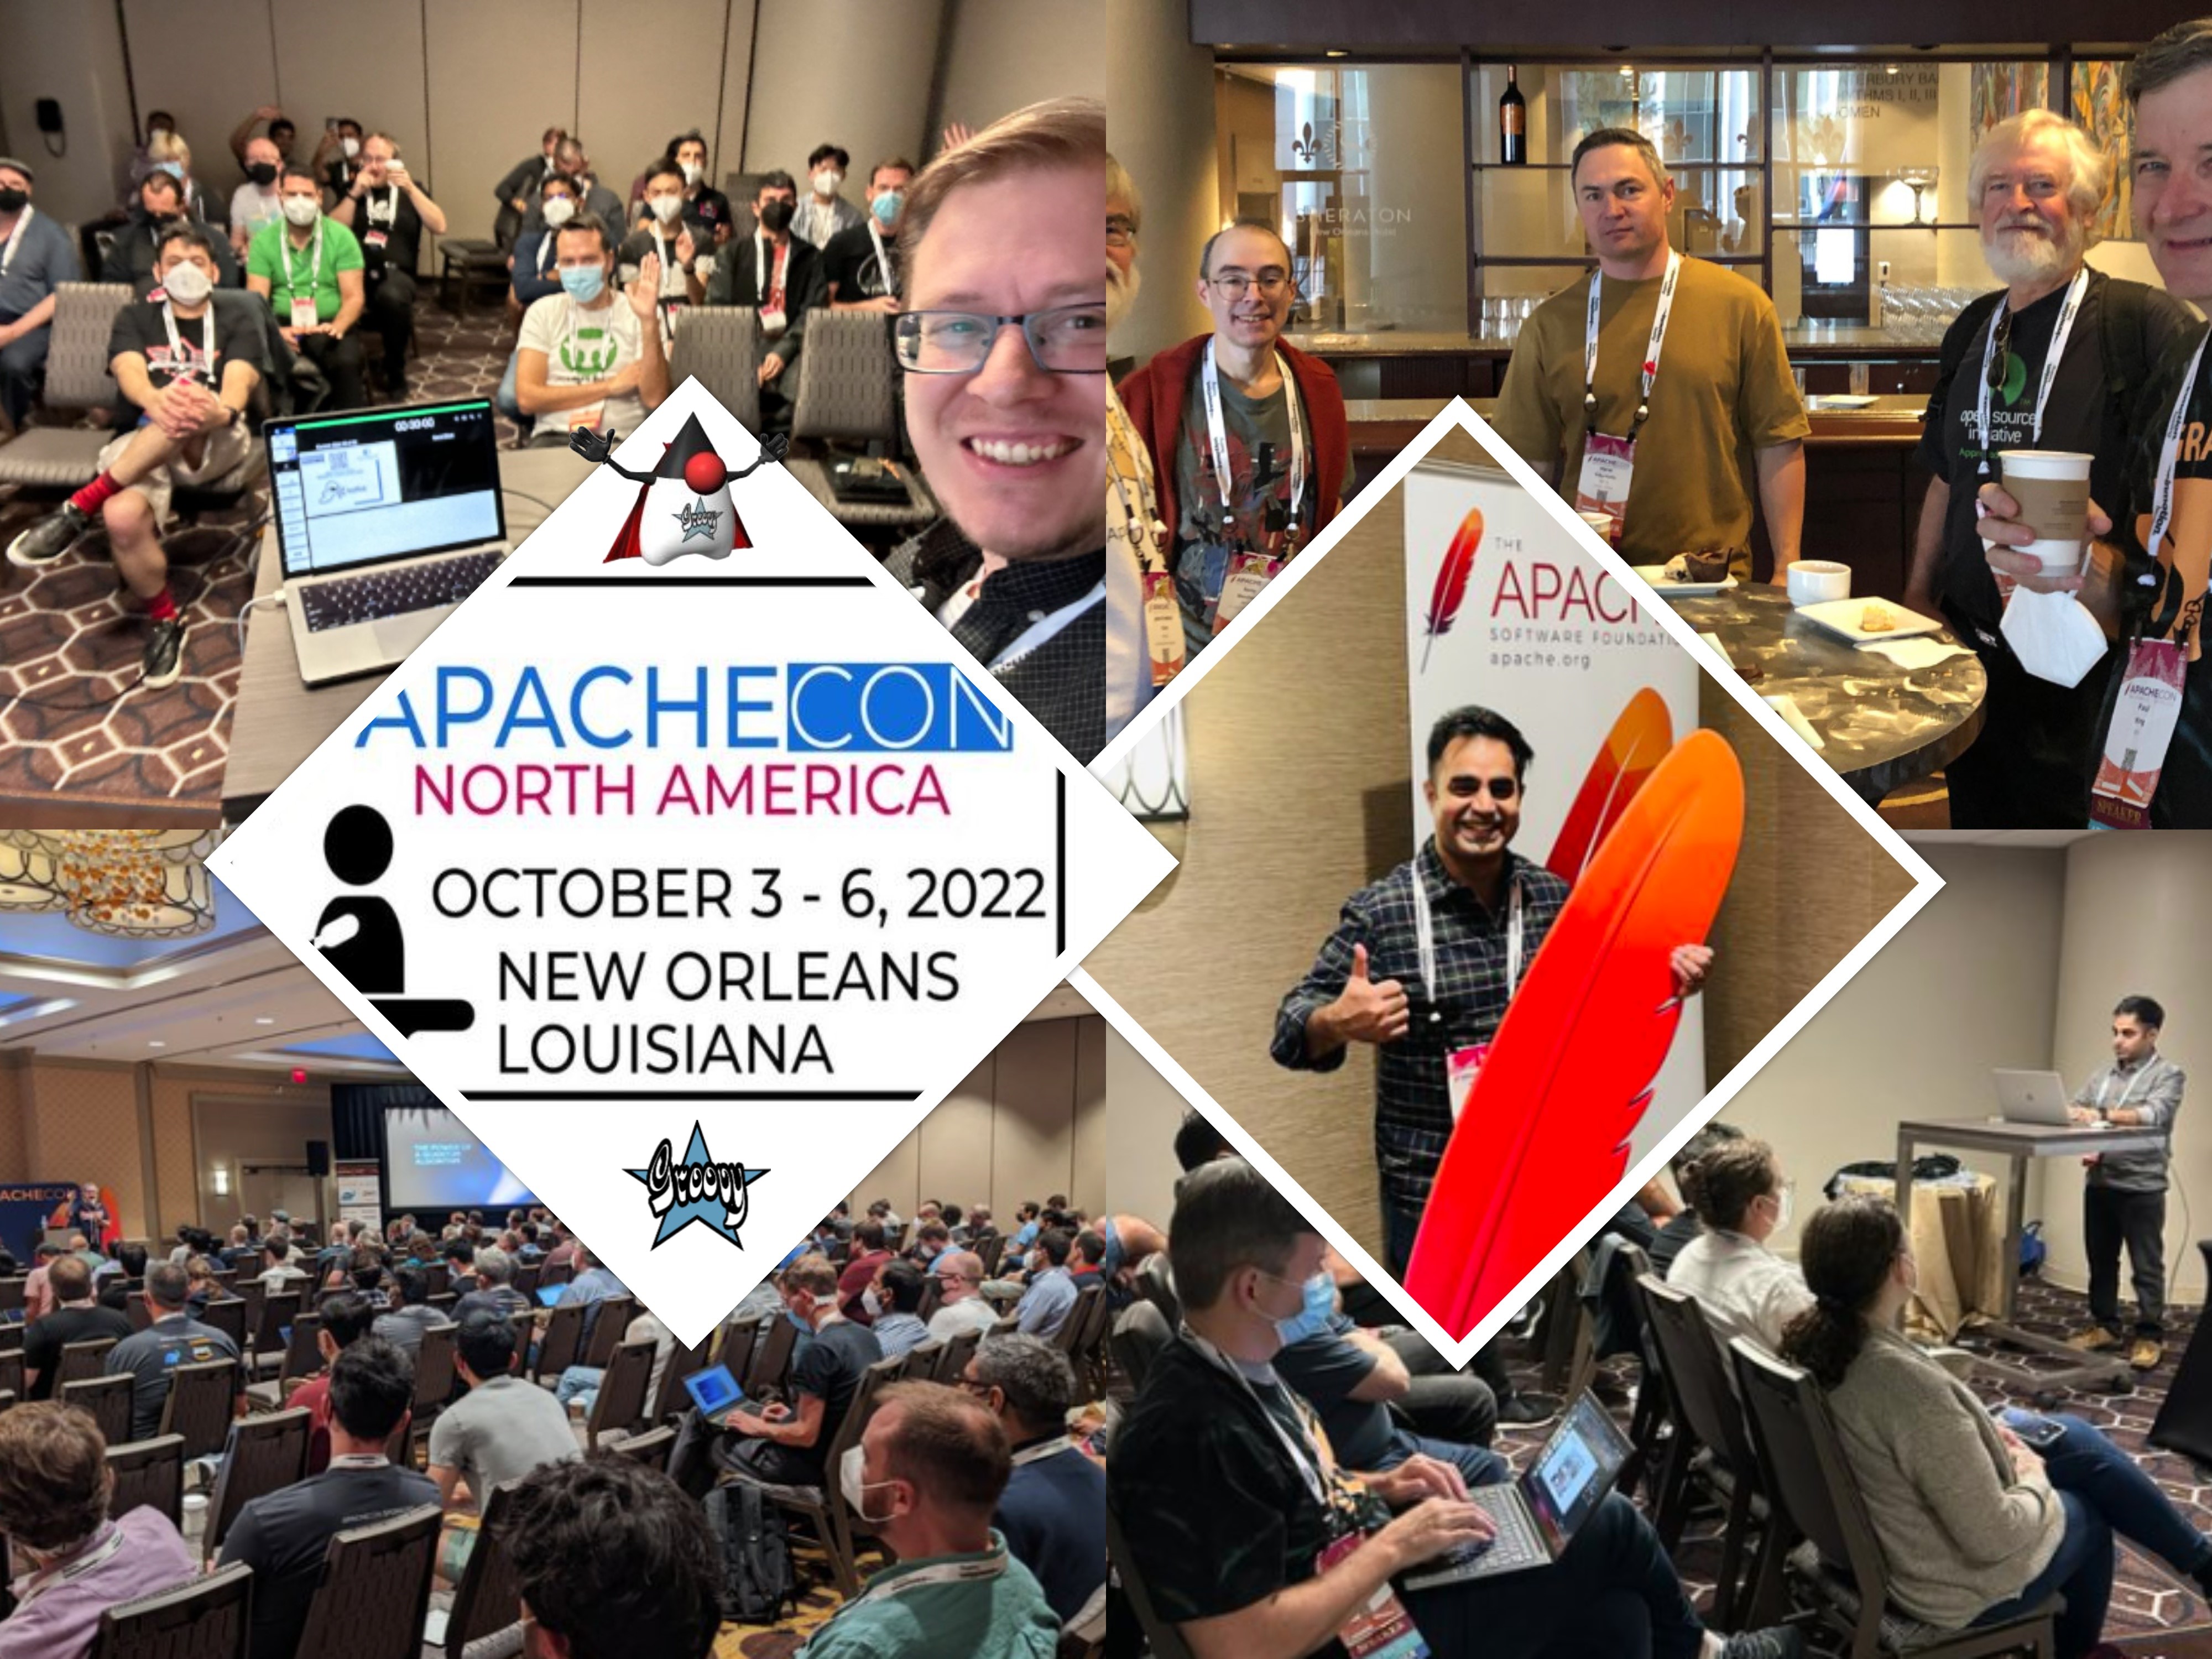 Some photos from ApacheCon 2022